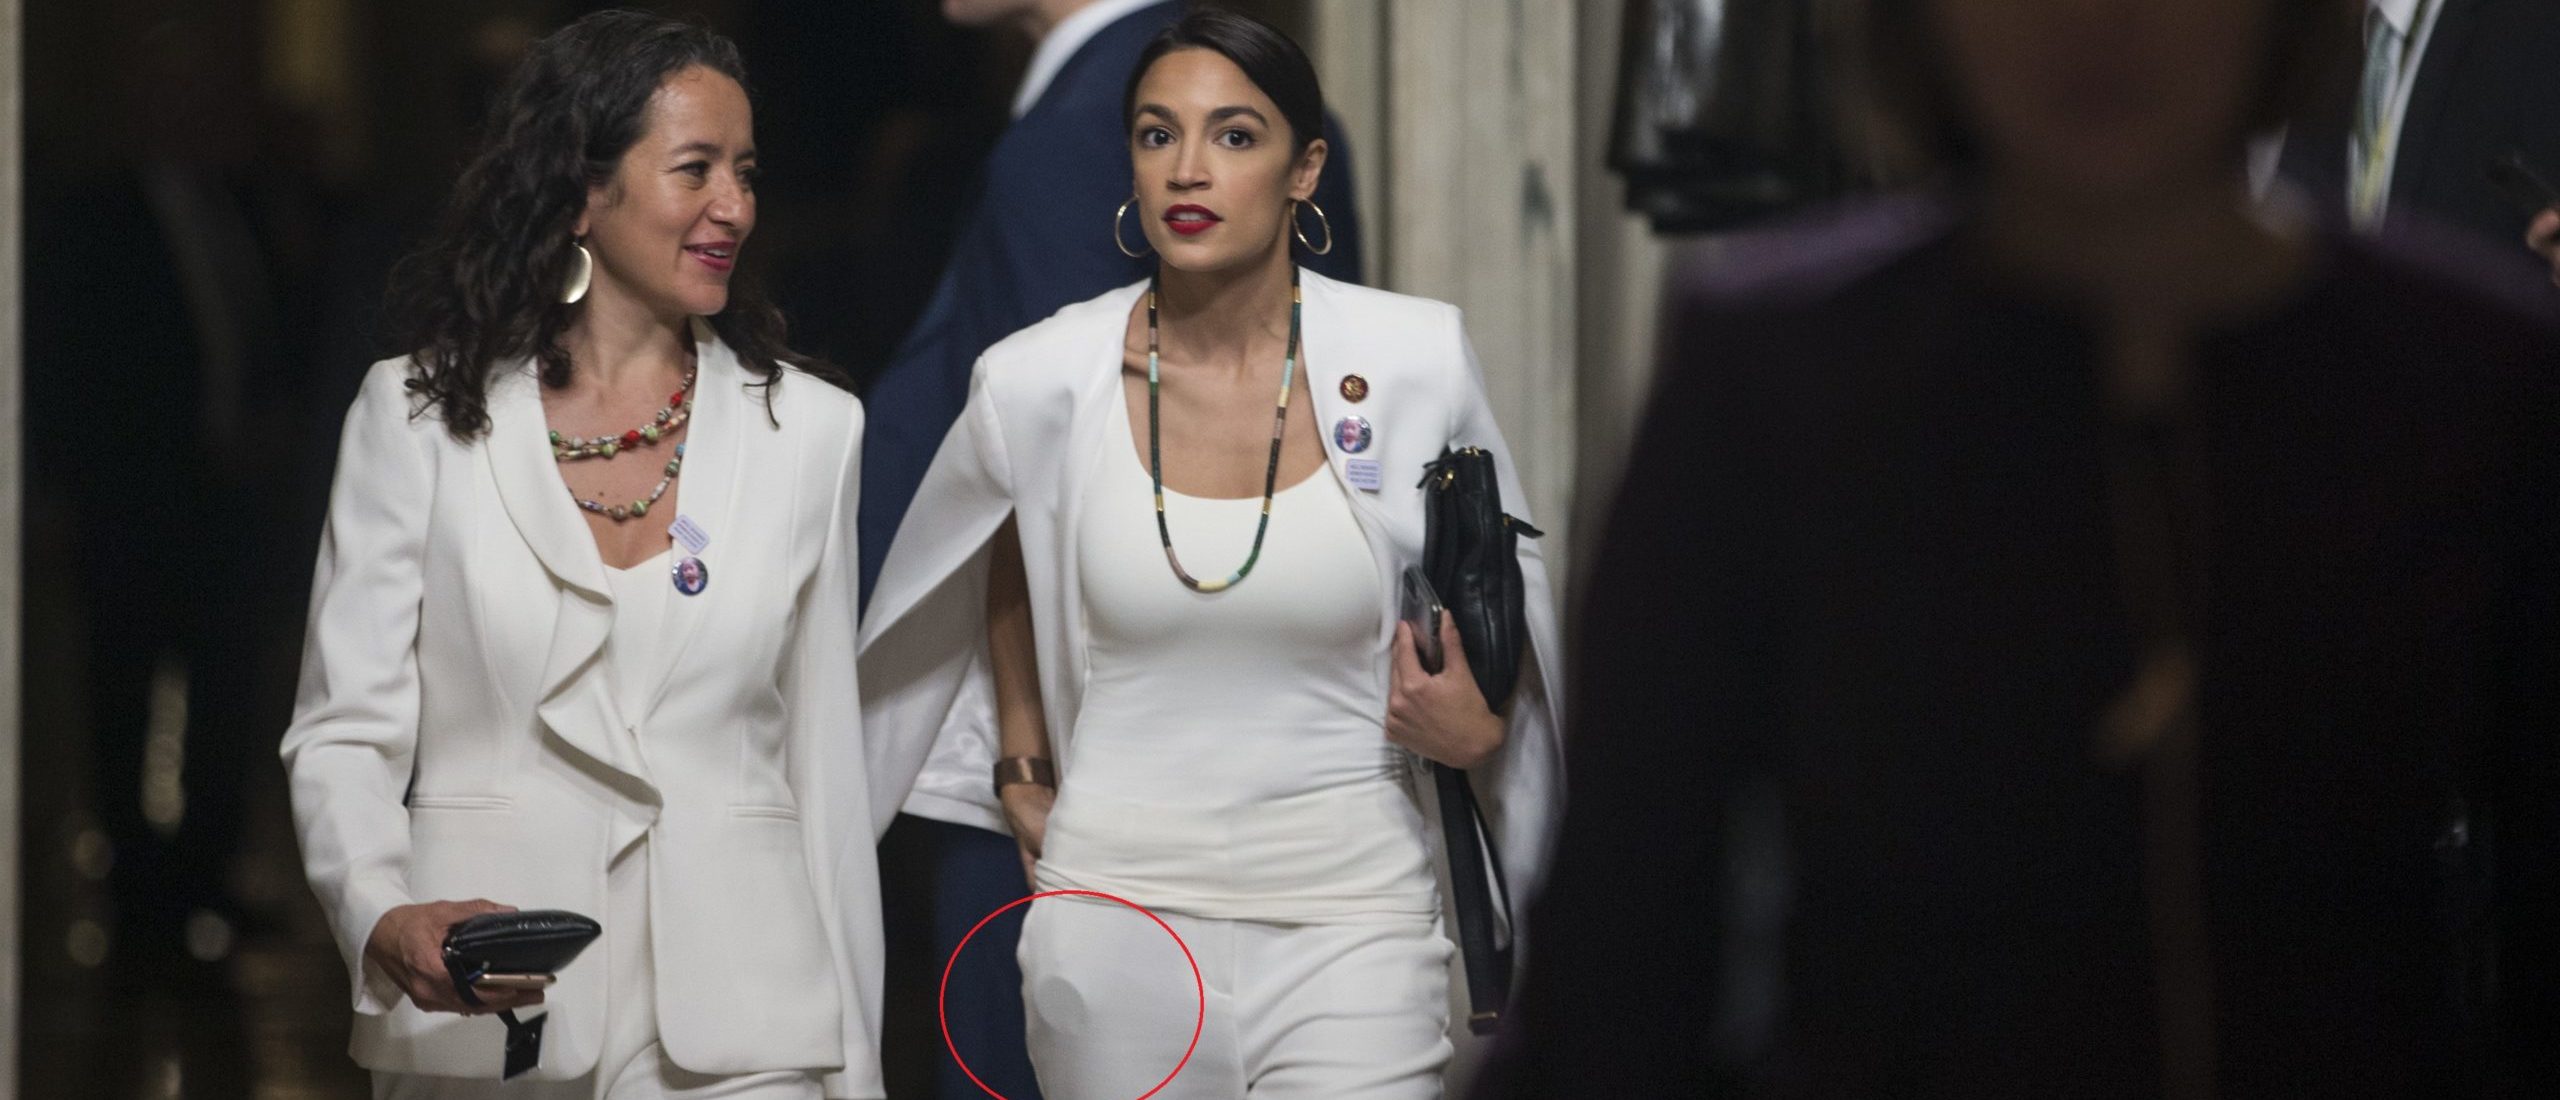 Is AOC Packing Zynachinos? The Internet Is Ablaze With Allegations ...